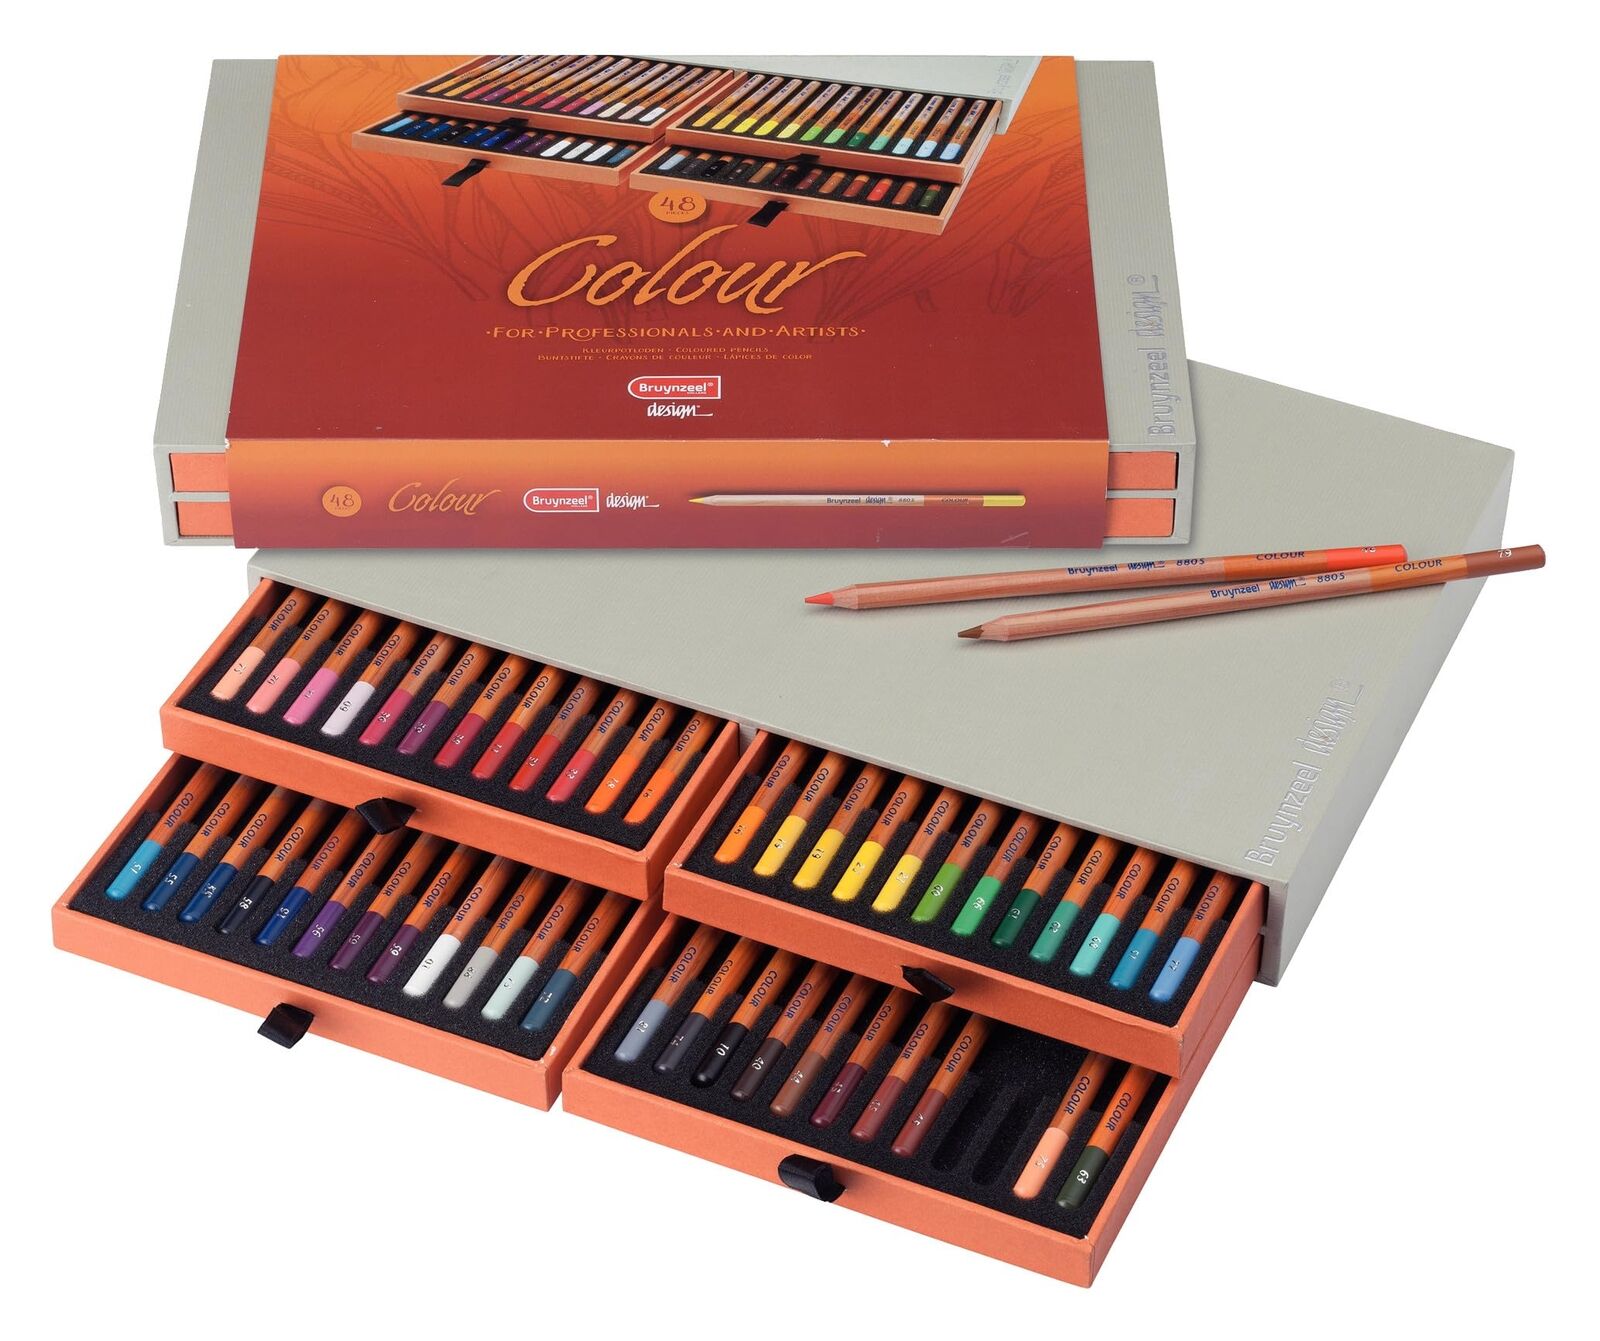 Bruynzeel Design Coloured Box Of 48 Pencil 48 Count (Pack of 1), Multicolored 